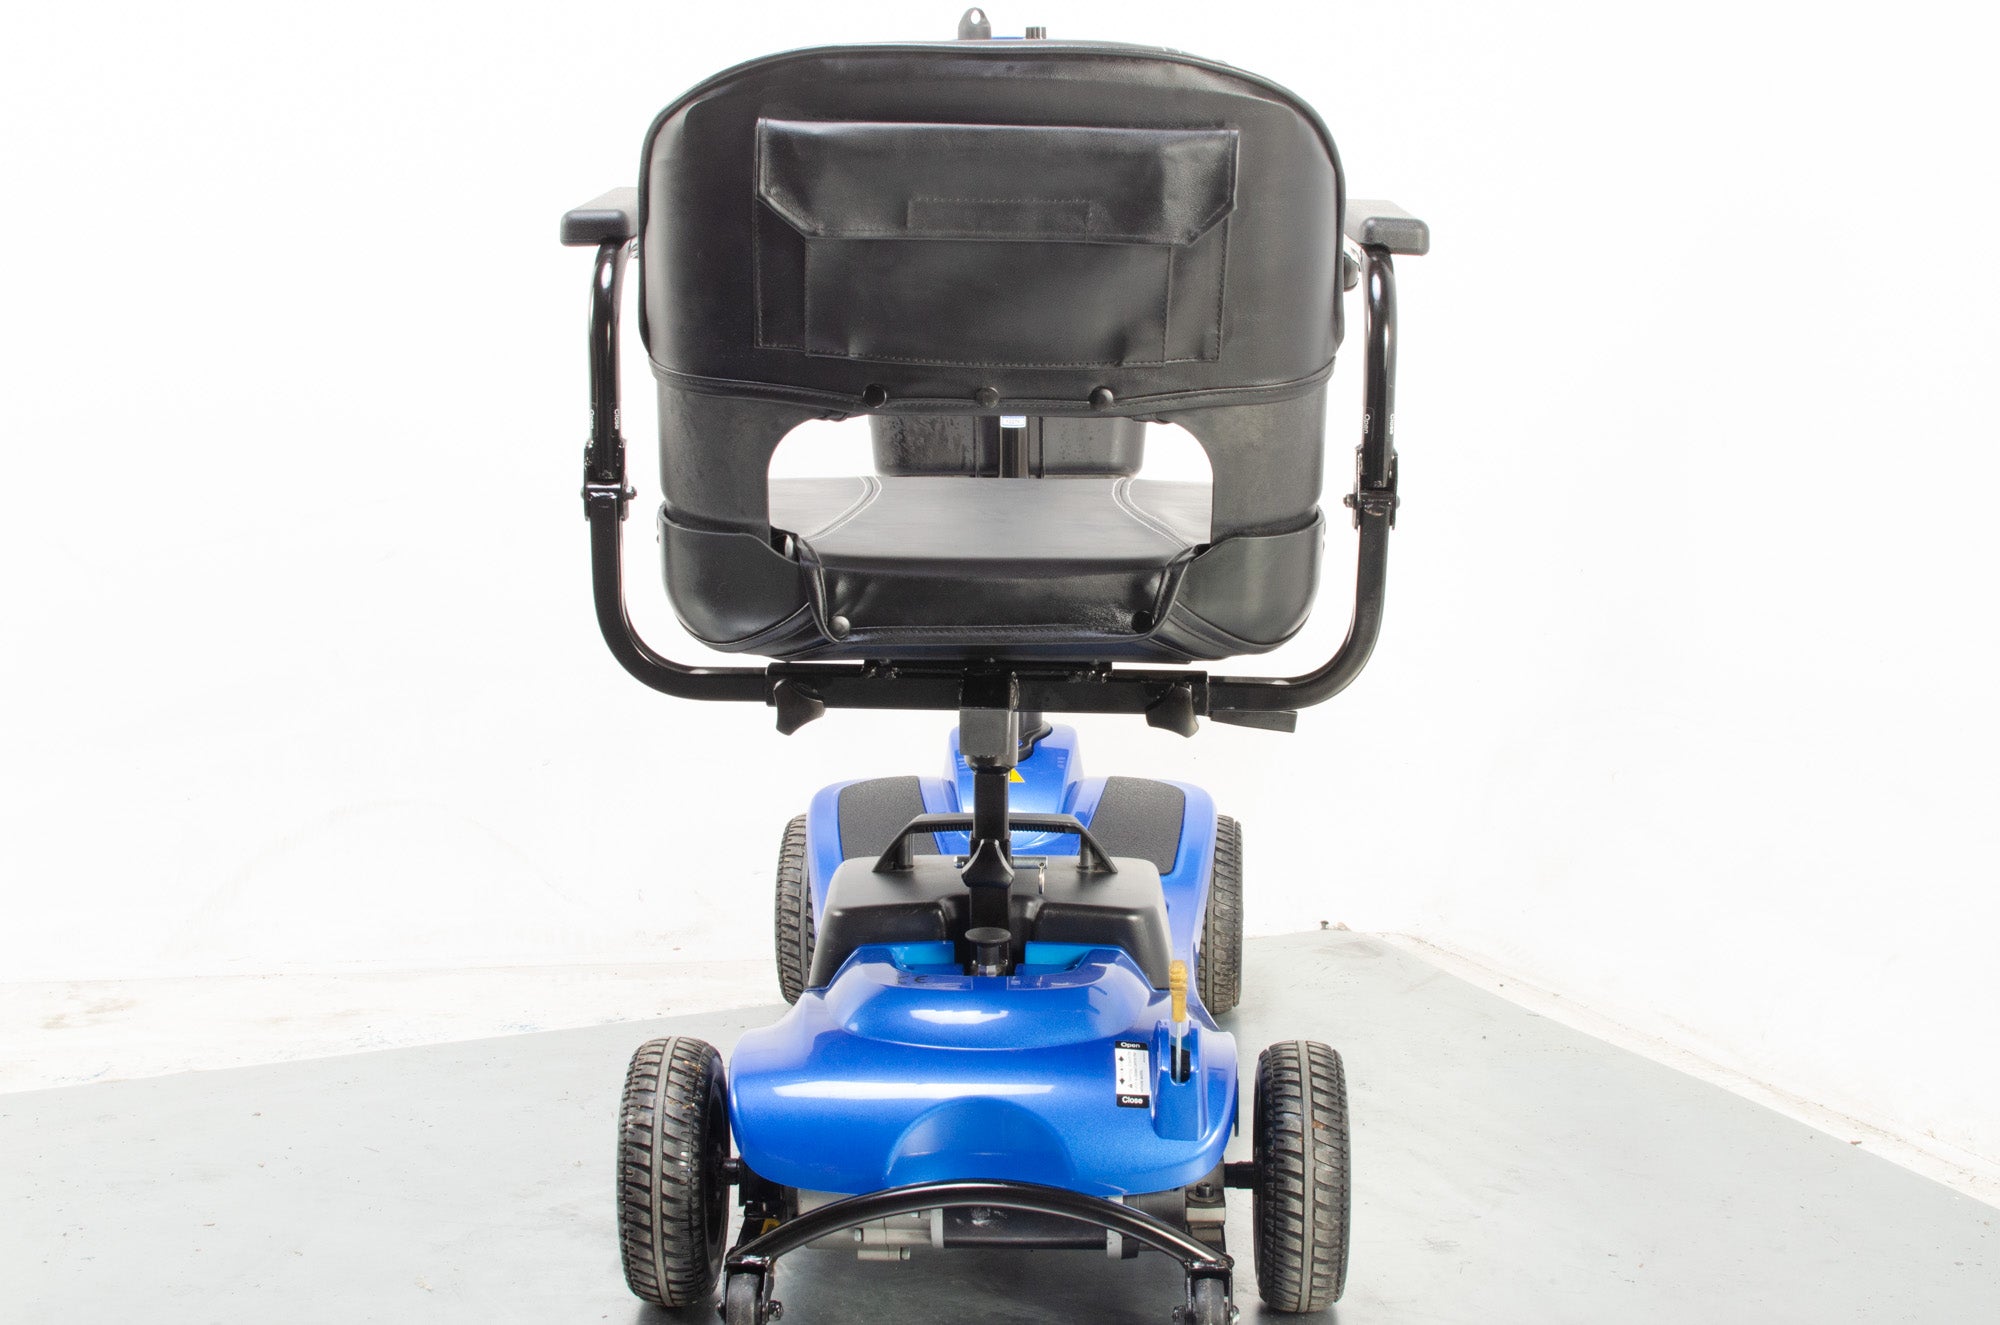 2018 One Rehab Liberty Vogue 4mph Mobility Boot Scooter with Suspension in Blue